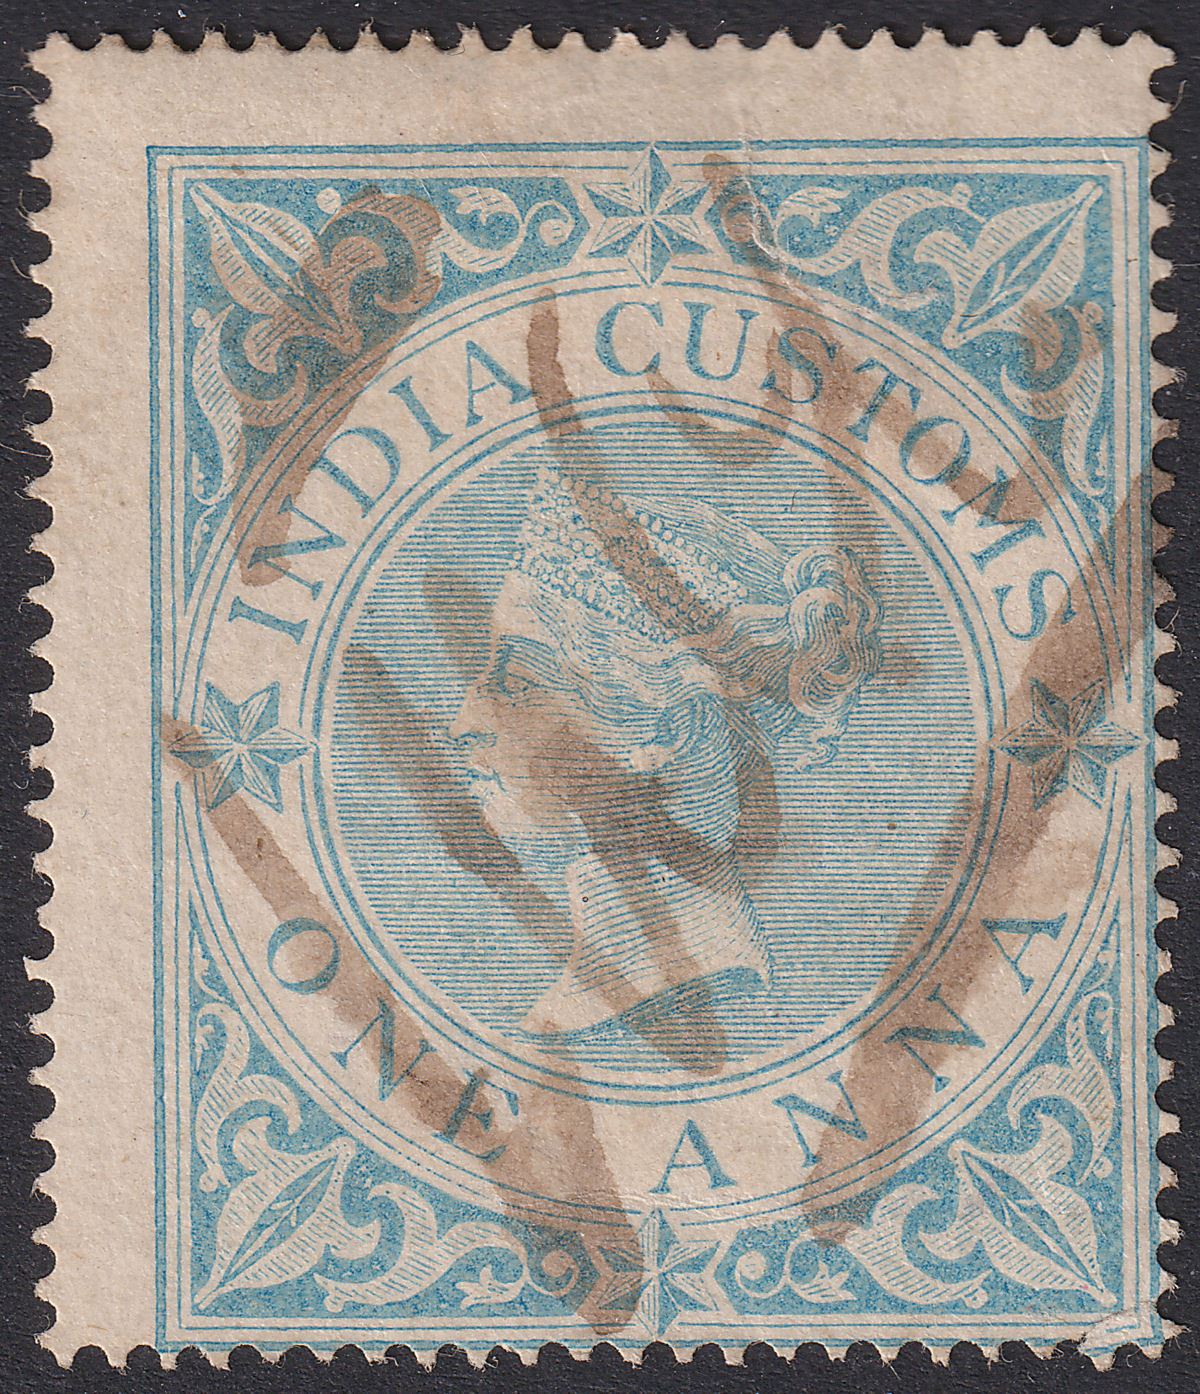 India 1865 QV Revenue Customs 1a Light Blue perf 15½x15 Used BF1 faults